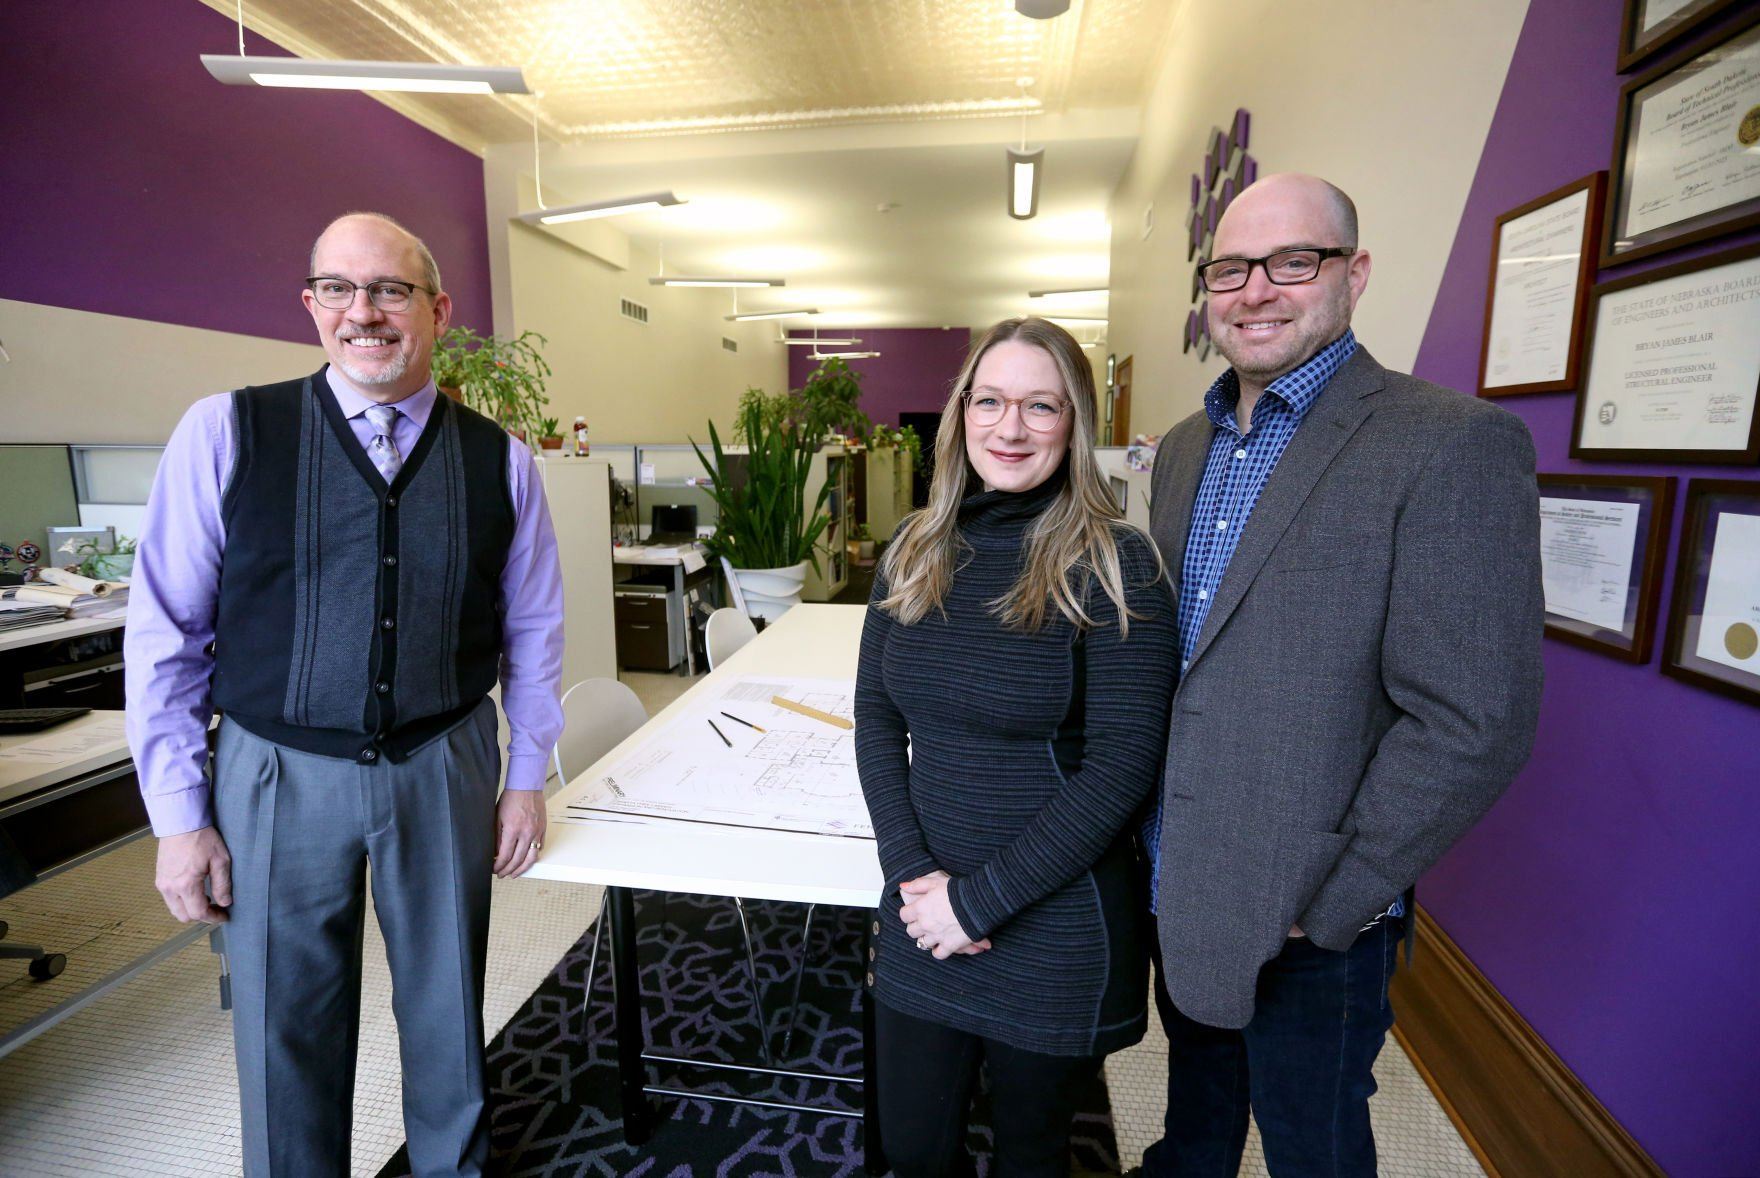 Kevin Eipperle (from left), president of FEH Design, and Emily and Andrew McCready, owners at 563 Design, stand at FEH Design in Dubuque on Monday, April 4, 2022. The McCreadys have joined FEH Design and have taken on new roles with the company.    PHOTO CREDIT: JESSICA REILLY